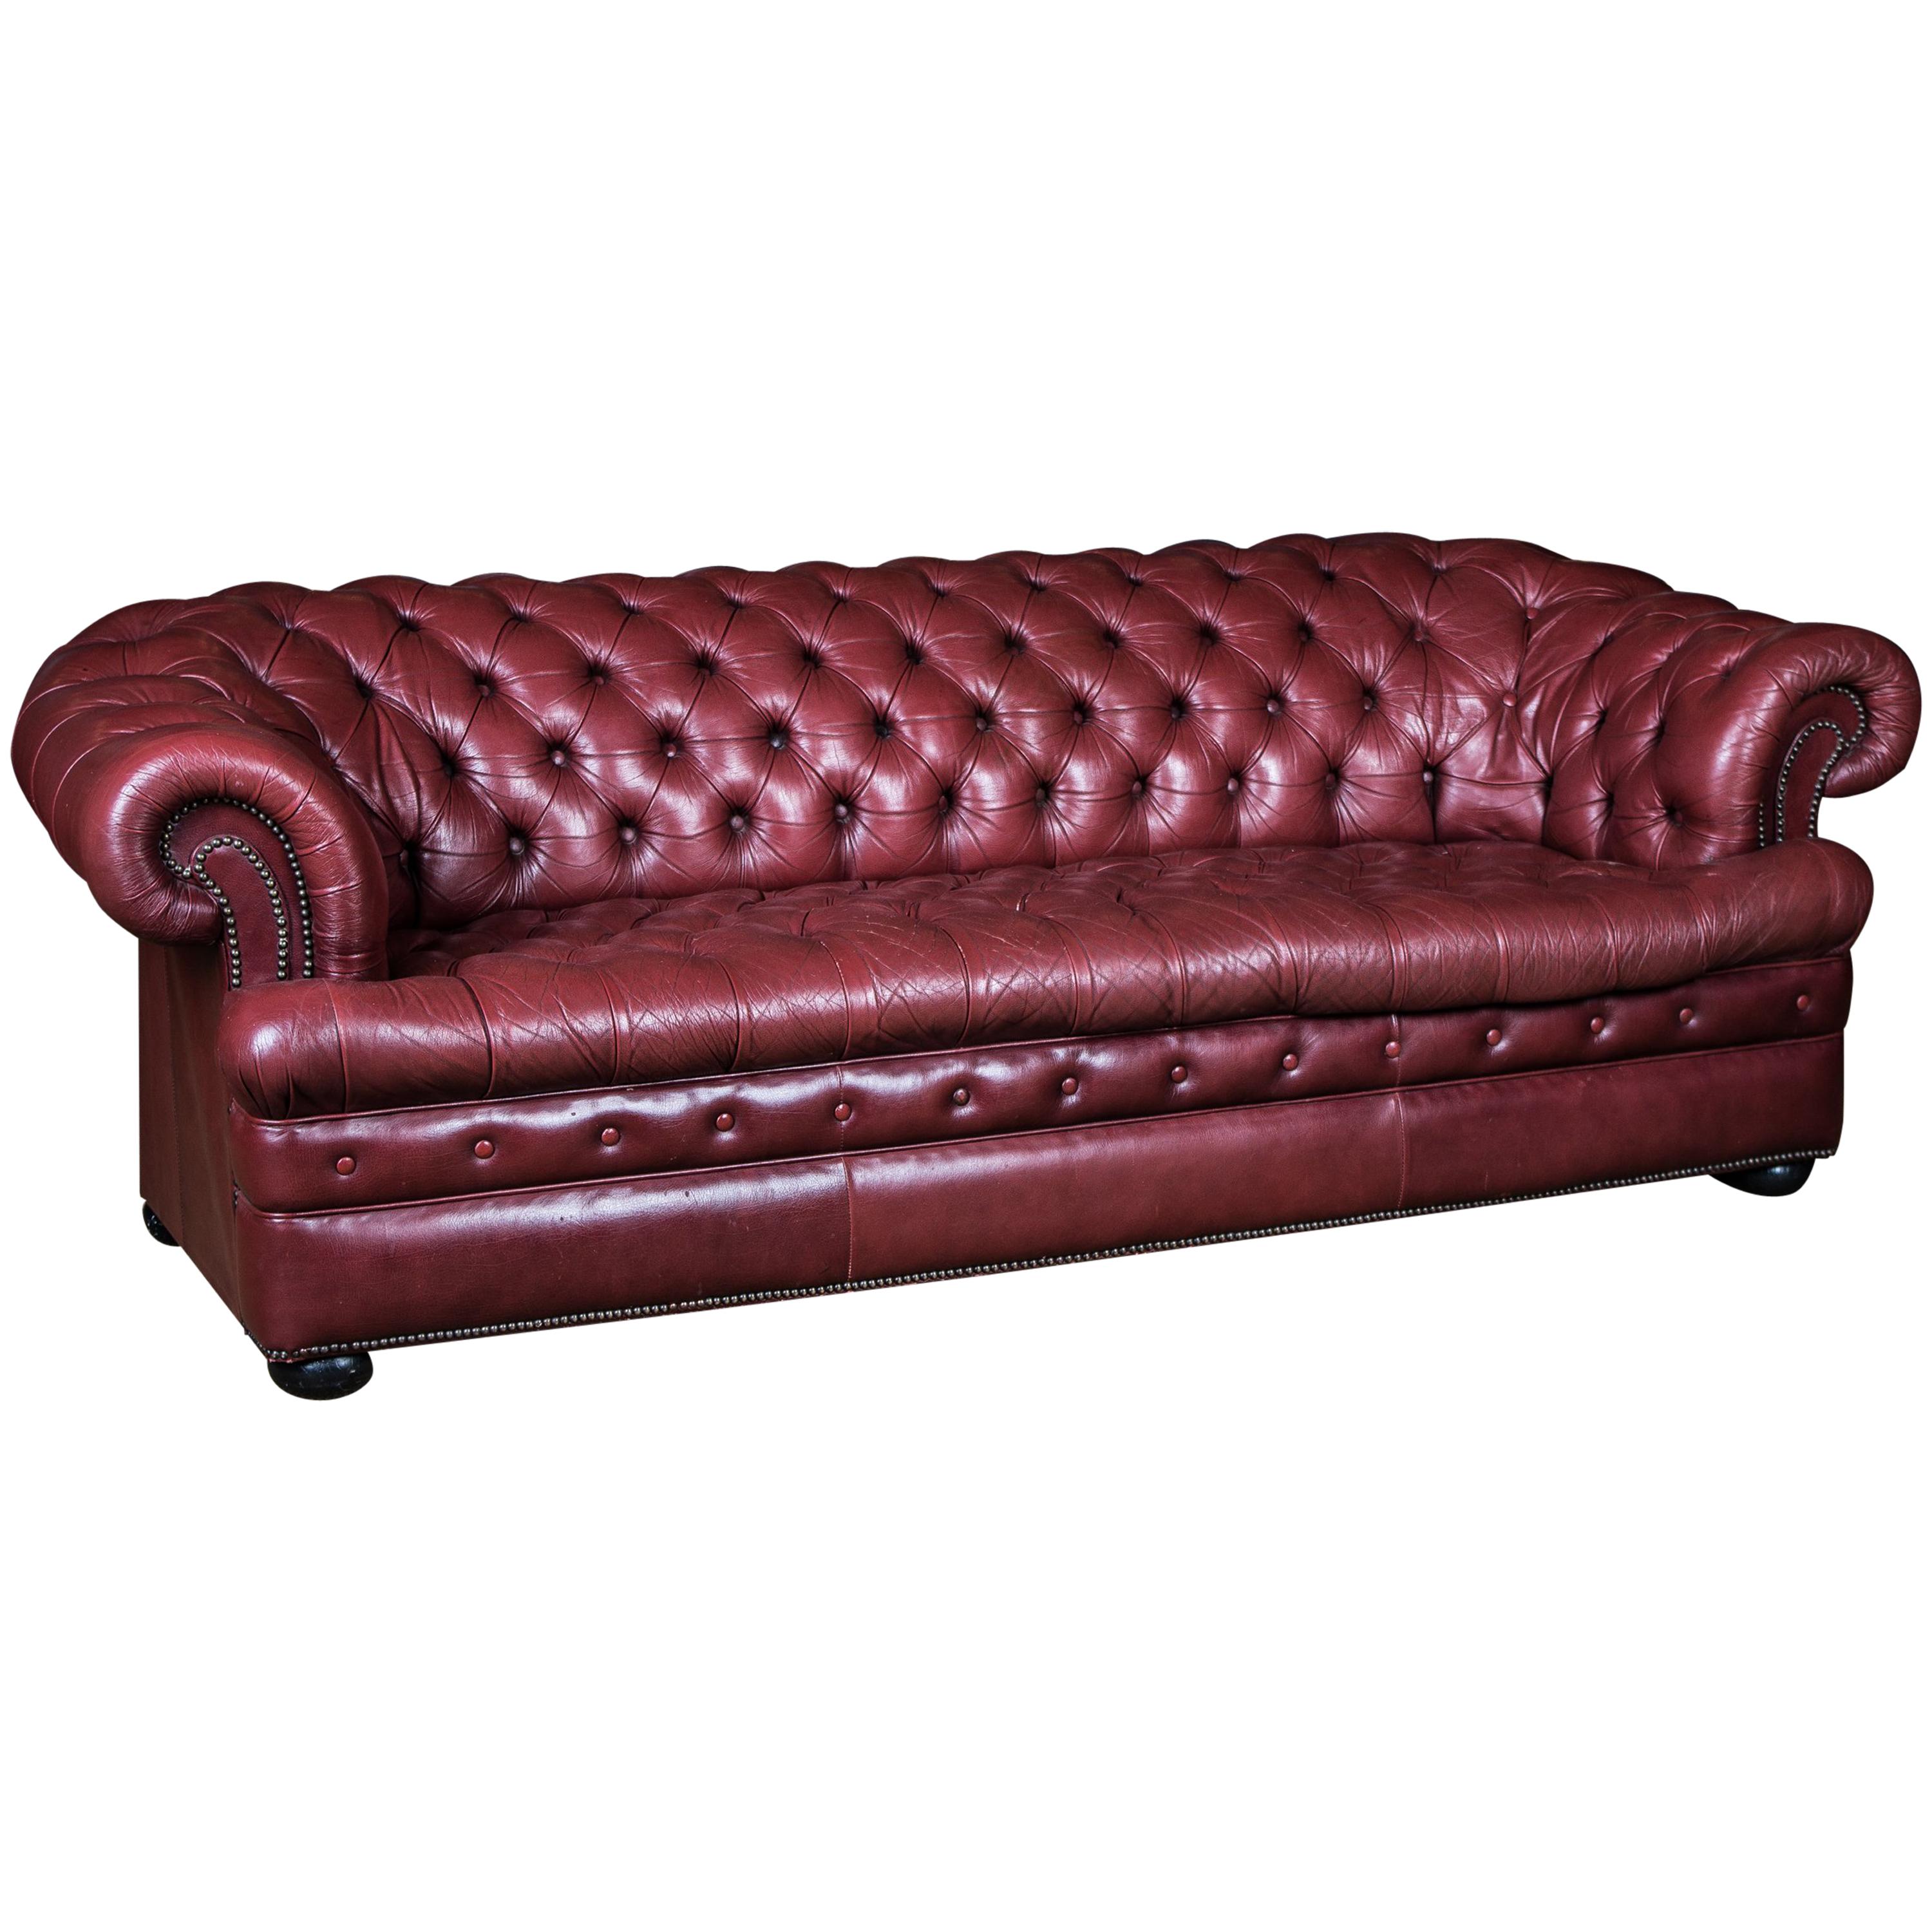 Original English Chesterfield Leather Sofa Three-Seat Couch